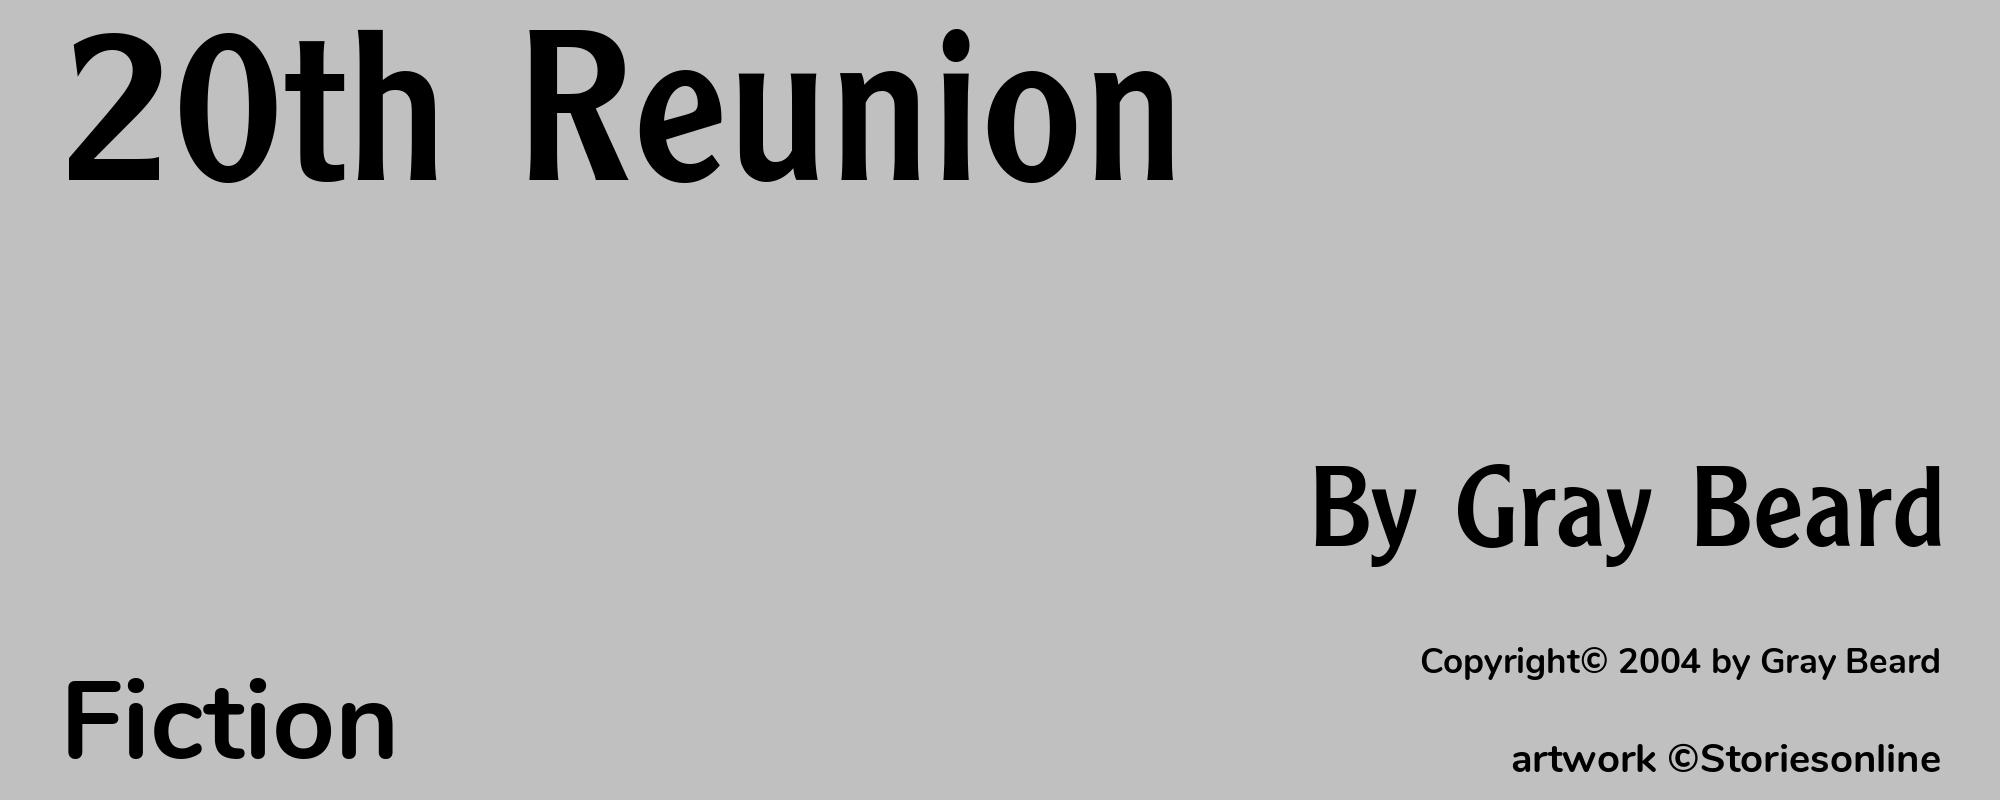 20th Reunion - Cover